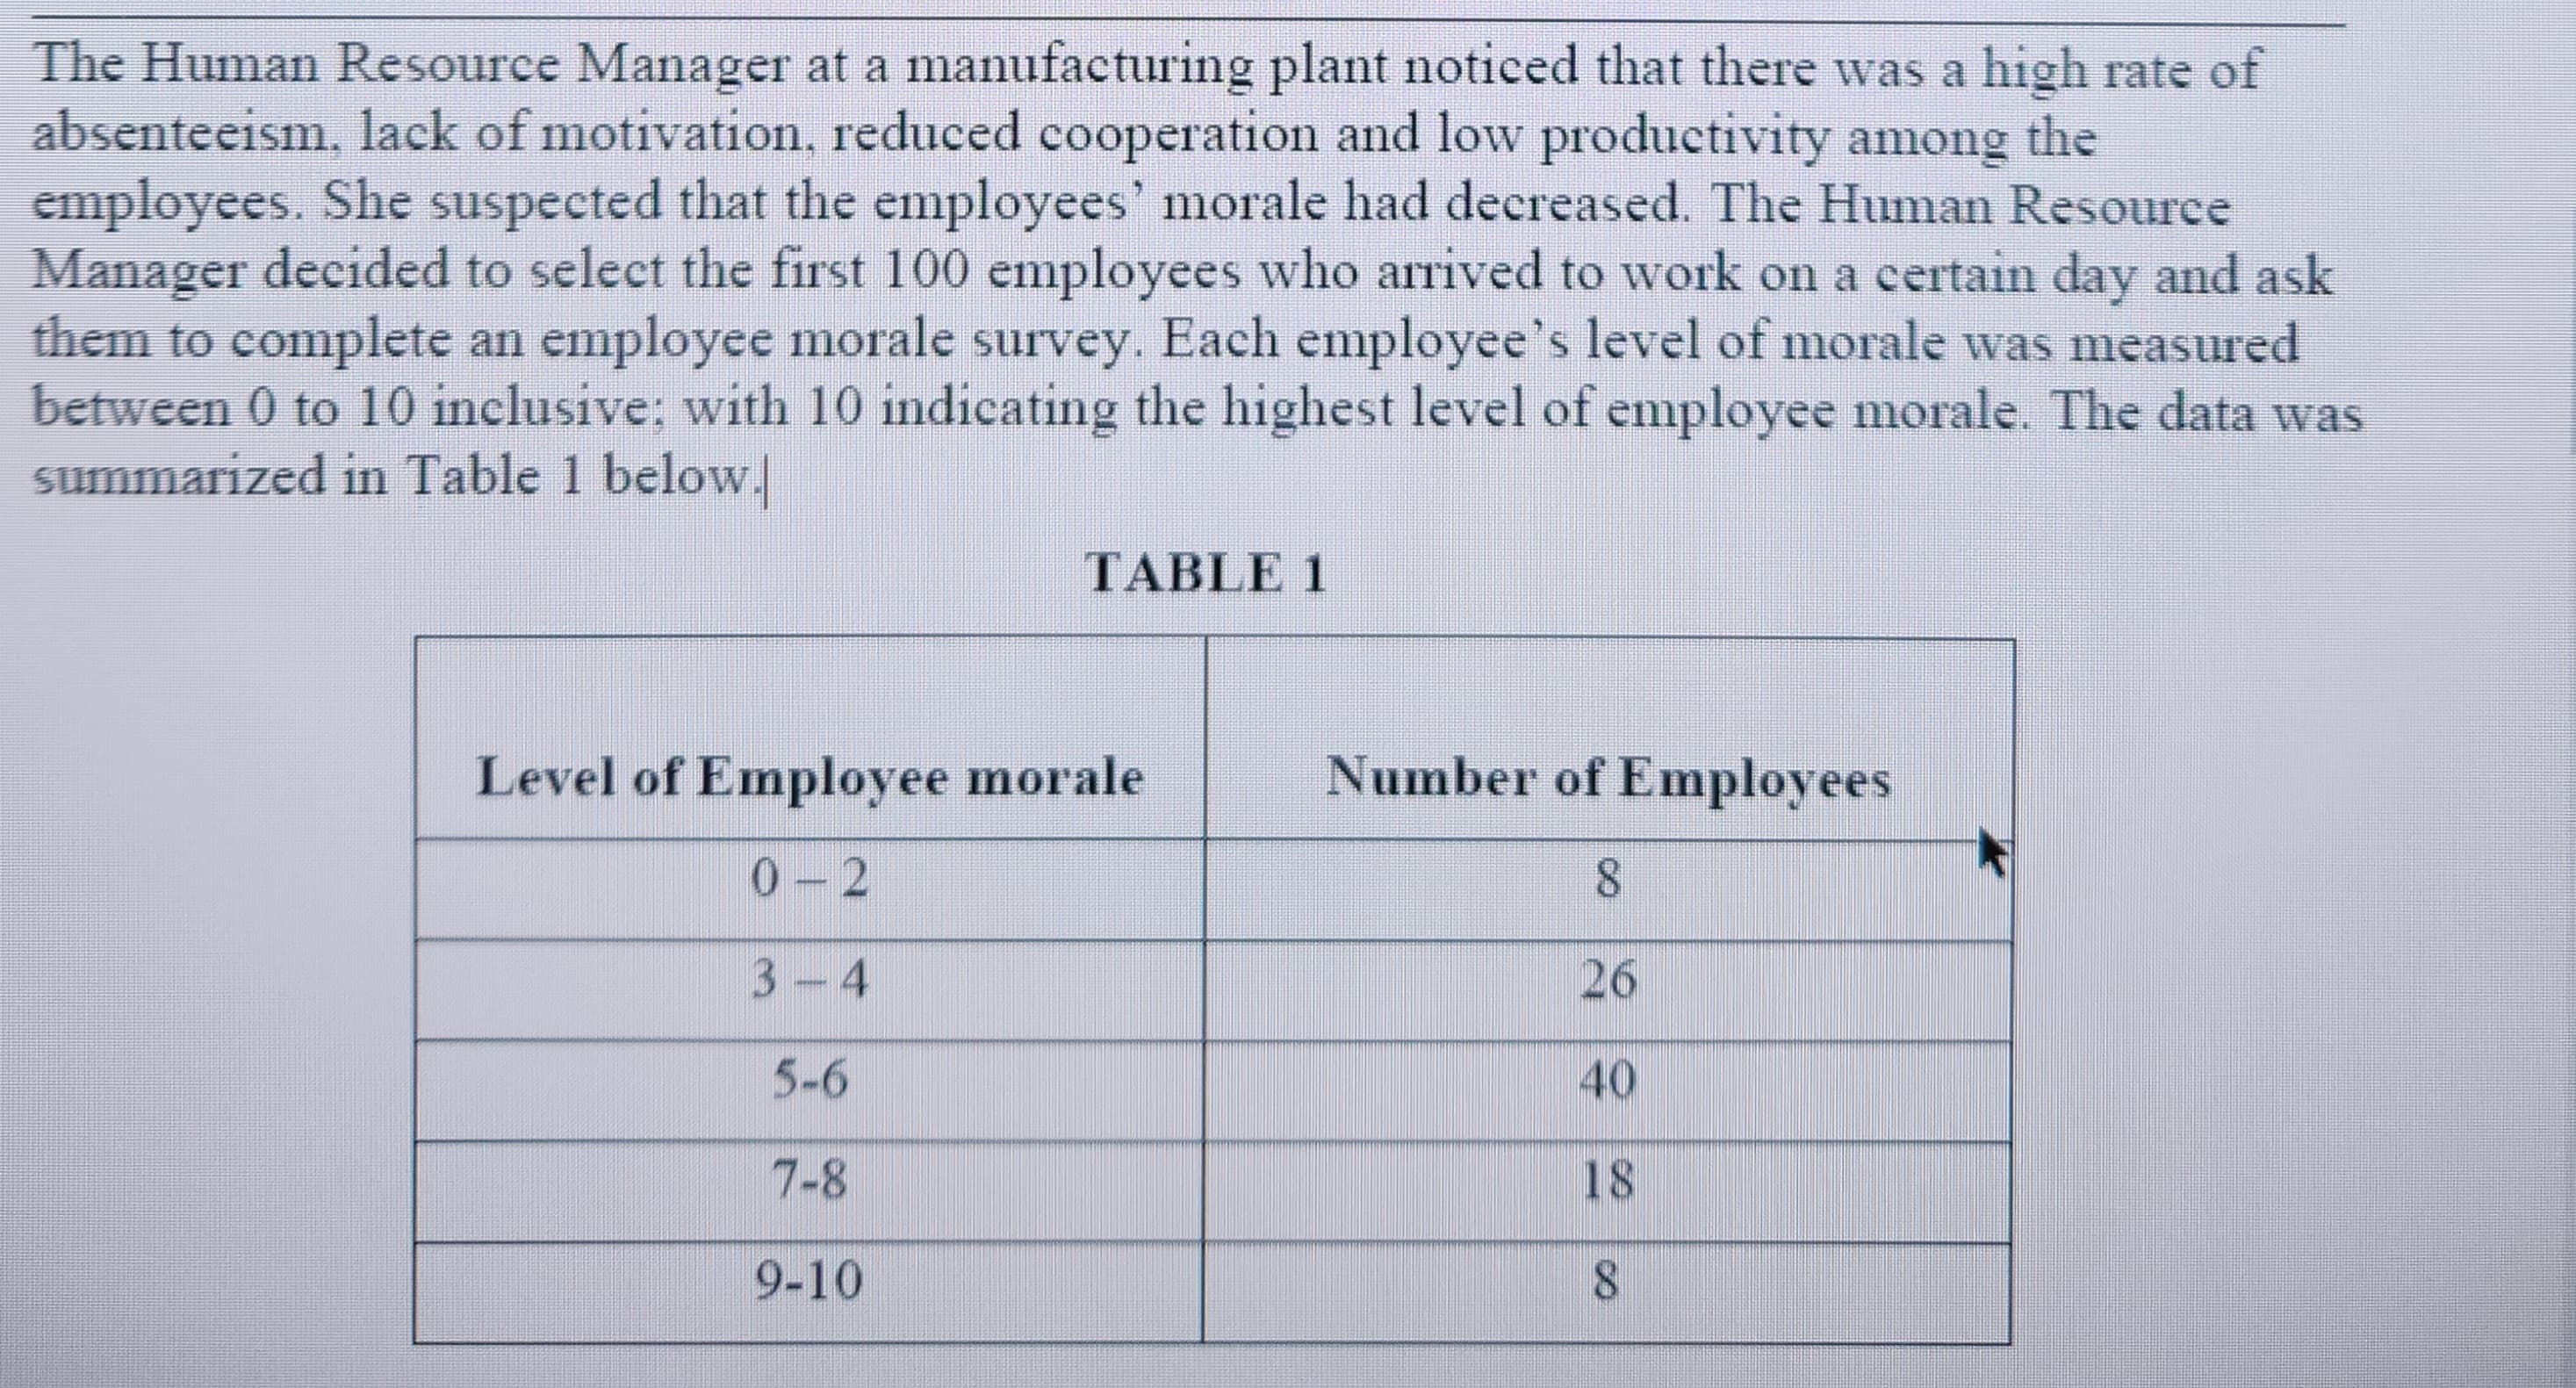 The Human Resource Manager at a manufacturing plant noticed that there was a high rate of
absenteeism, lack of motivation, reduced cooperation and low productivity among the
employees. She suspected that the employees' morale had decreased. The Human Resource
Manager decided to select the first 100 employees who arrived to work on a certain day and ask
them to complete an employee morale survey. Each employee's level of morale was measured
between 0 to 10 inclusive; with 10 indicating the highest level of employee morale. The data was
summarized in Table 1 below.
TABLE 1
Level of Employee morale
0-2
3-4
5-6
7-8
9-10
Number of Employees
8
26
40
18
8